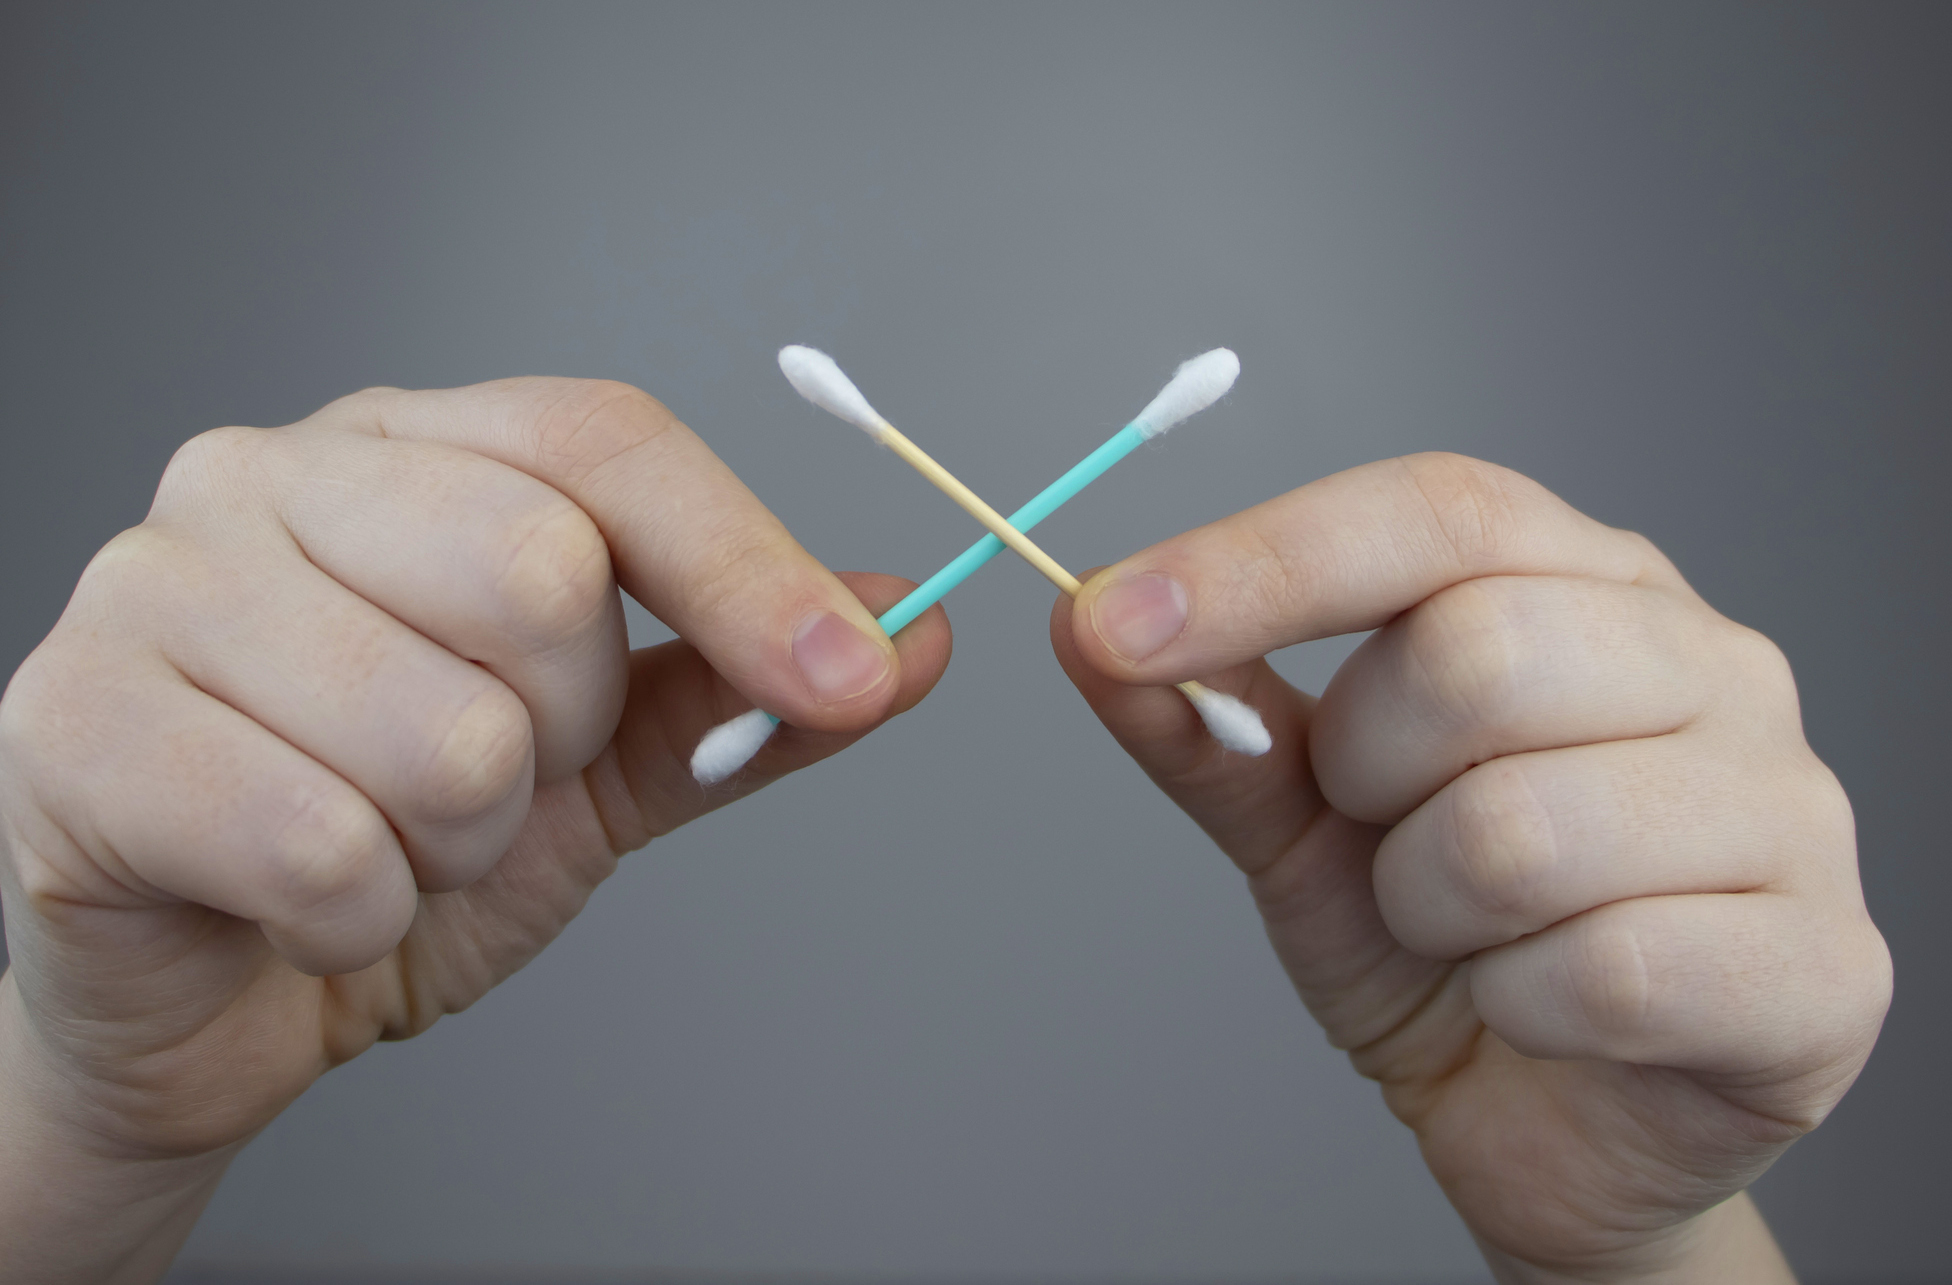 Two hands holding a cotton swab in an X formation.